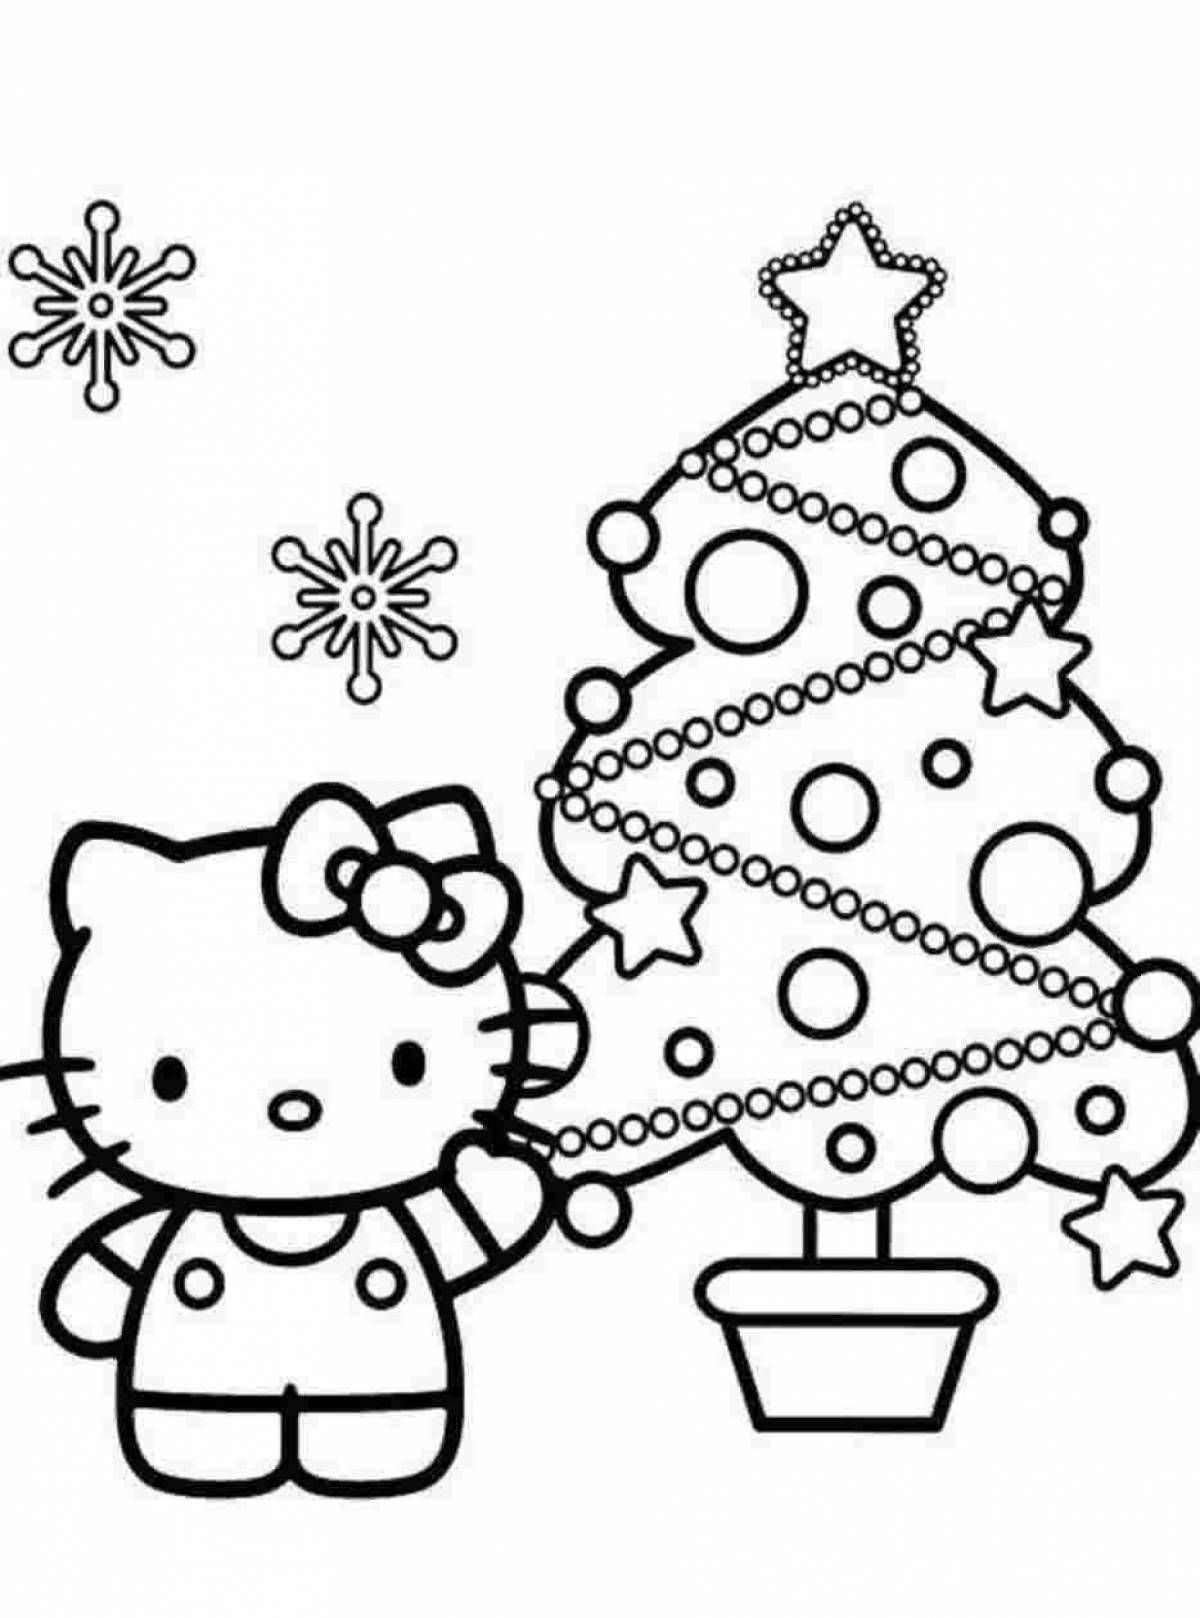 Bright Christmas coloring for the little ones